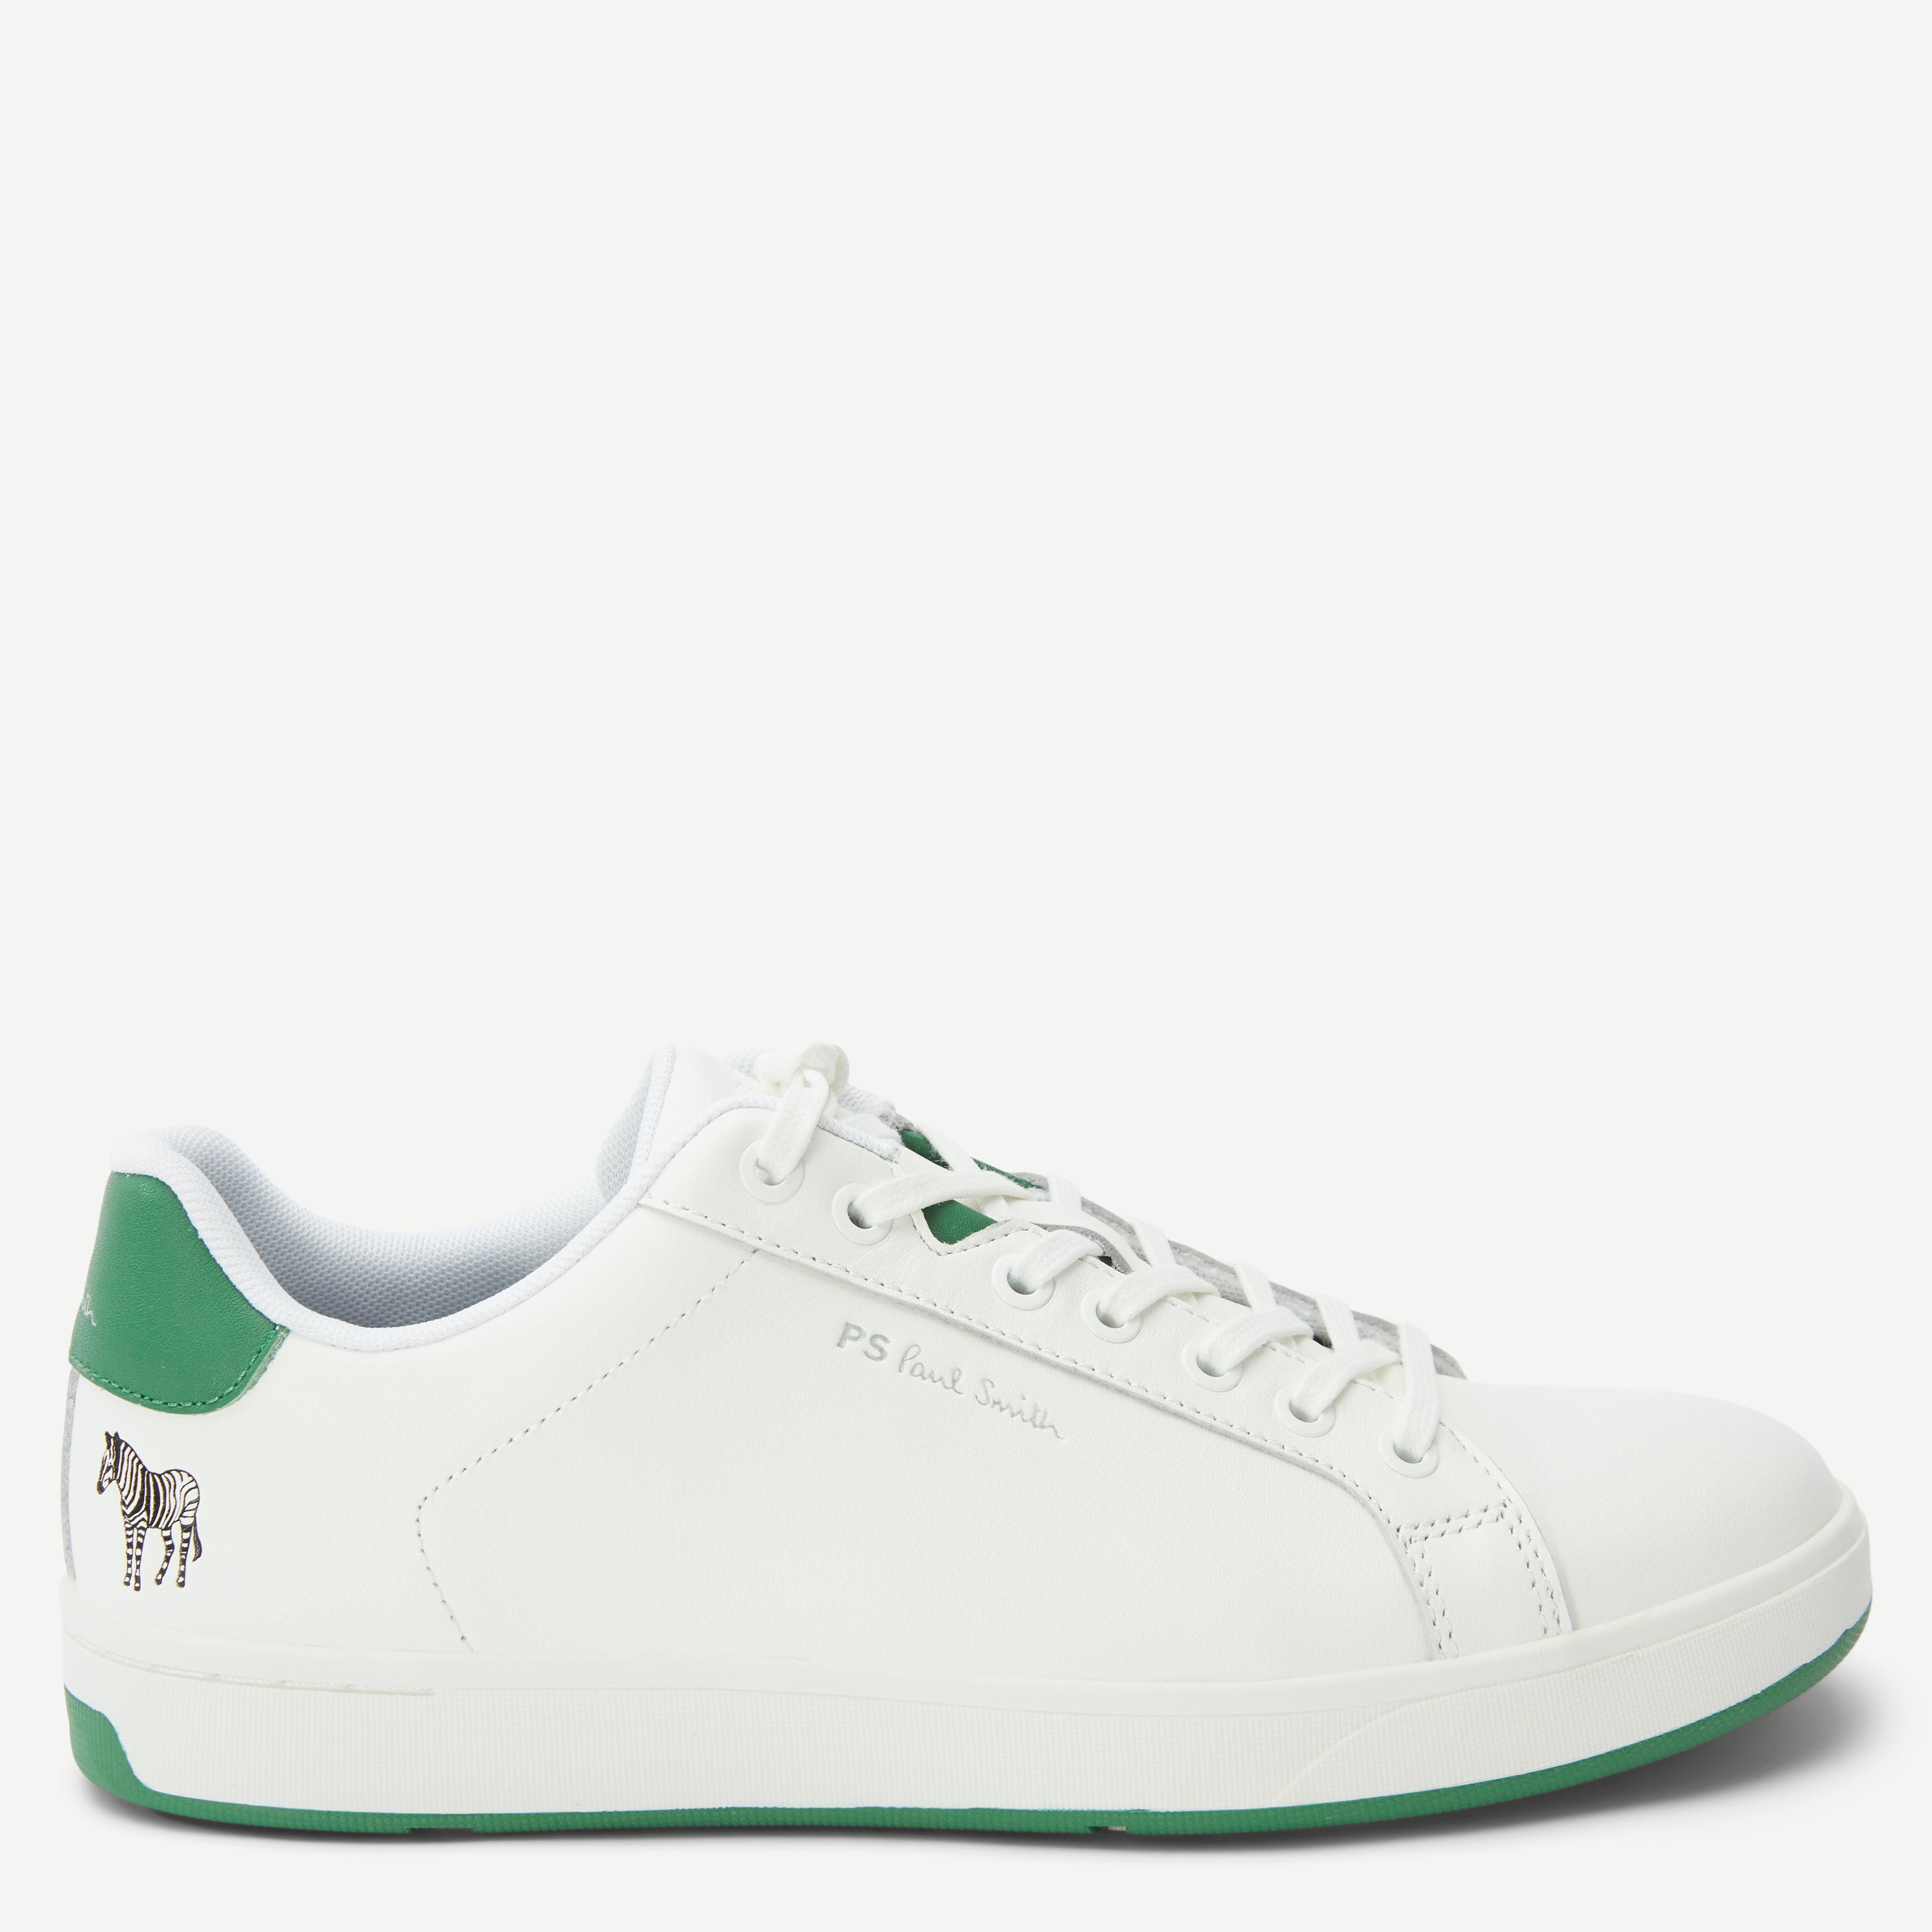 Paul Smith Shoes Sko ALY05-MCAS MENS SHOE ALBANY WHITE GREEN SPOILER Hvid